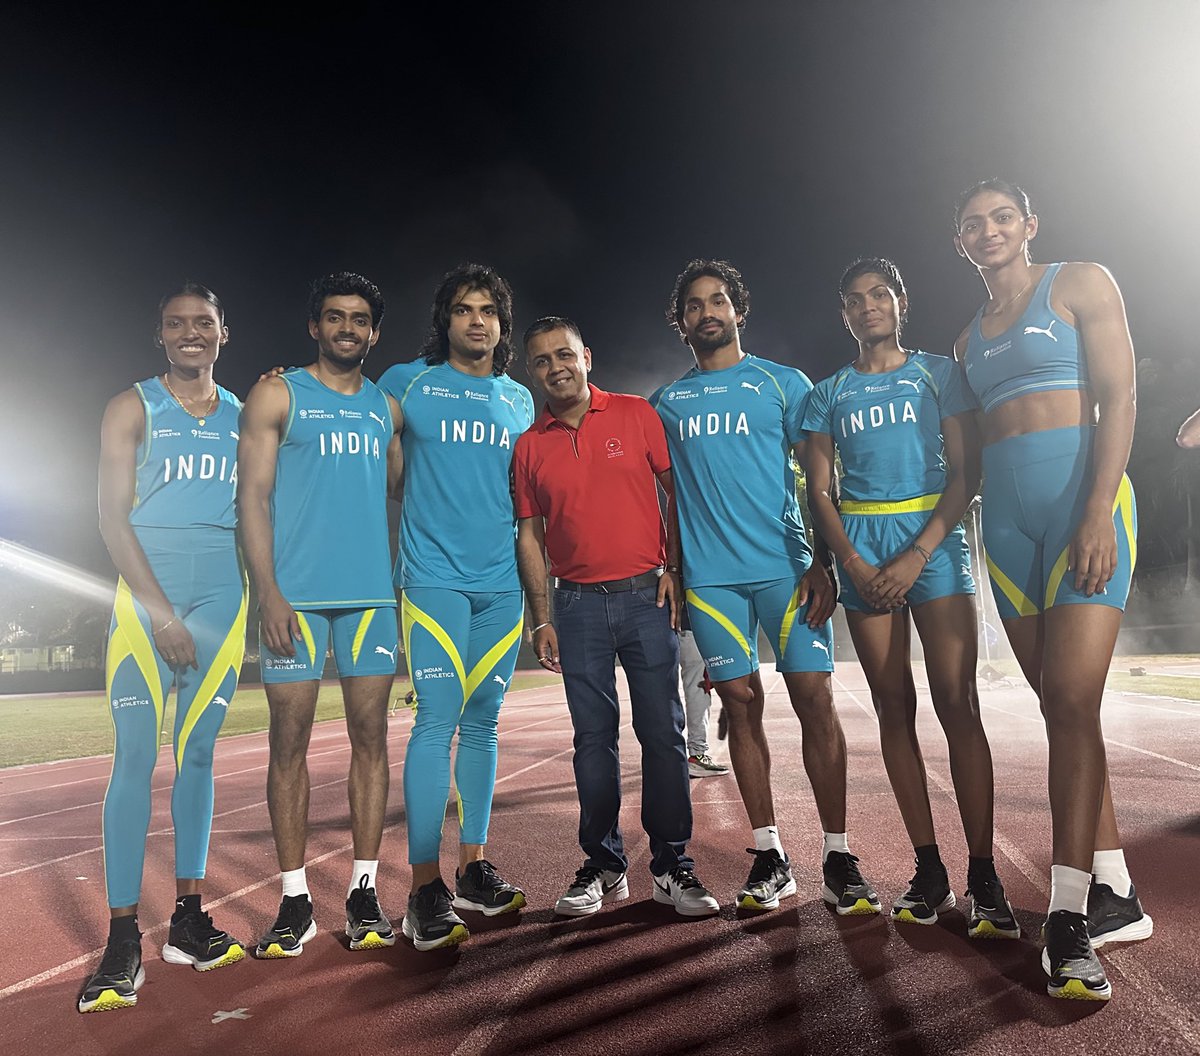 Delighted to have secured a landmark partnership between Athletics Federation of India and a leading global apparel and footwear brand @PUMA 

Puma is now the official sports kitting partner for Indian Athletics Team.